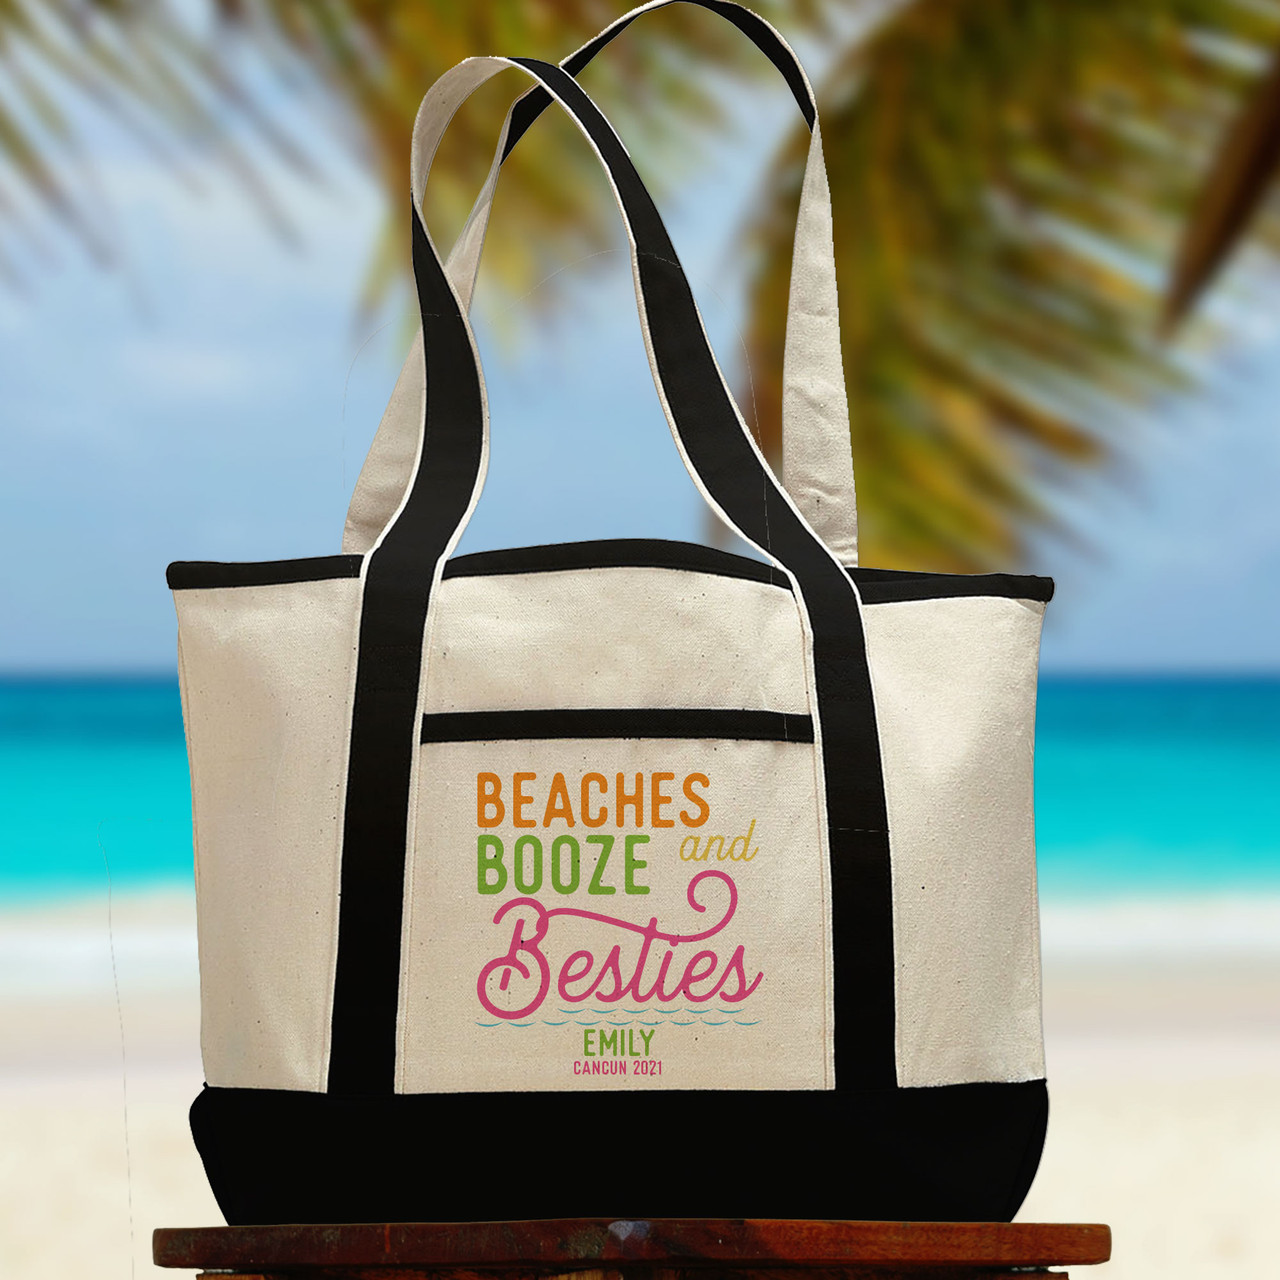 https://cdn11.bigcommerce.com/s-5grzuu6/images/stencil/1280x1280/products/5460/46367/Beaches-Booze-Besties-Personalized_Beach-Tote_Bag__92296.1646867752.jpg?c=2